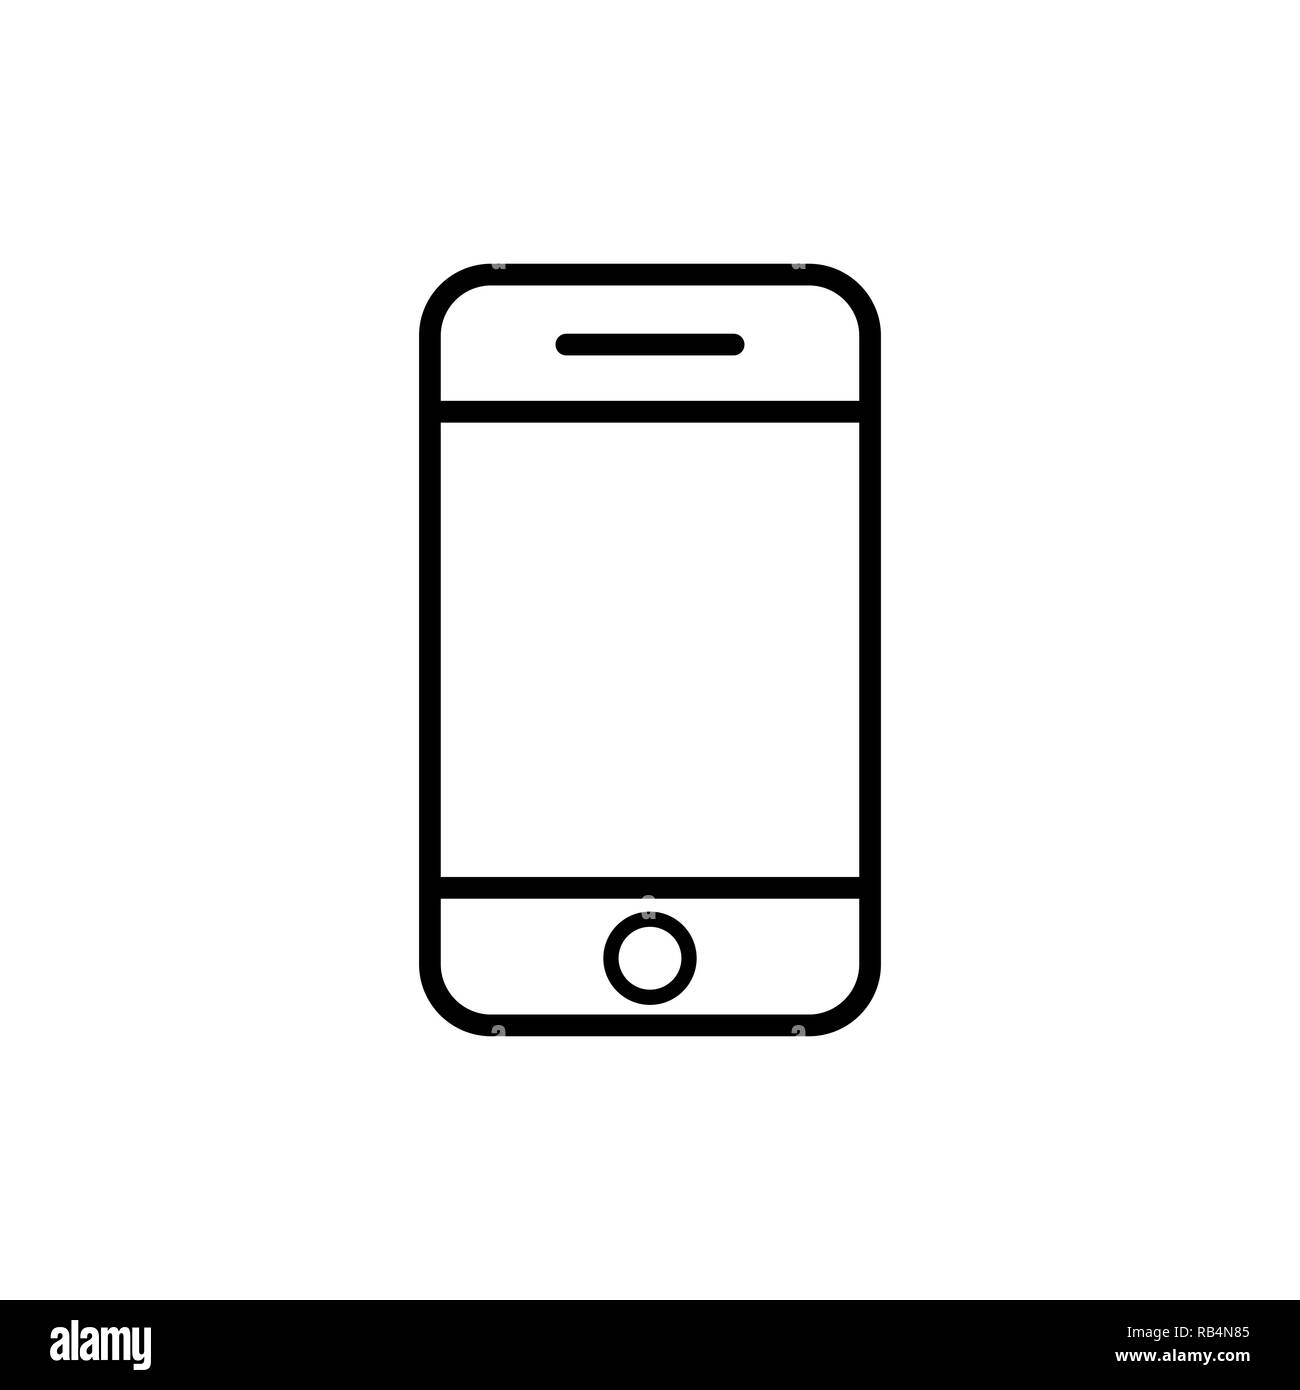 Cellphone symbol Cut Out Stock Images & Pictures - Alamy